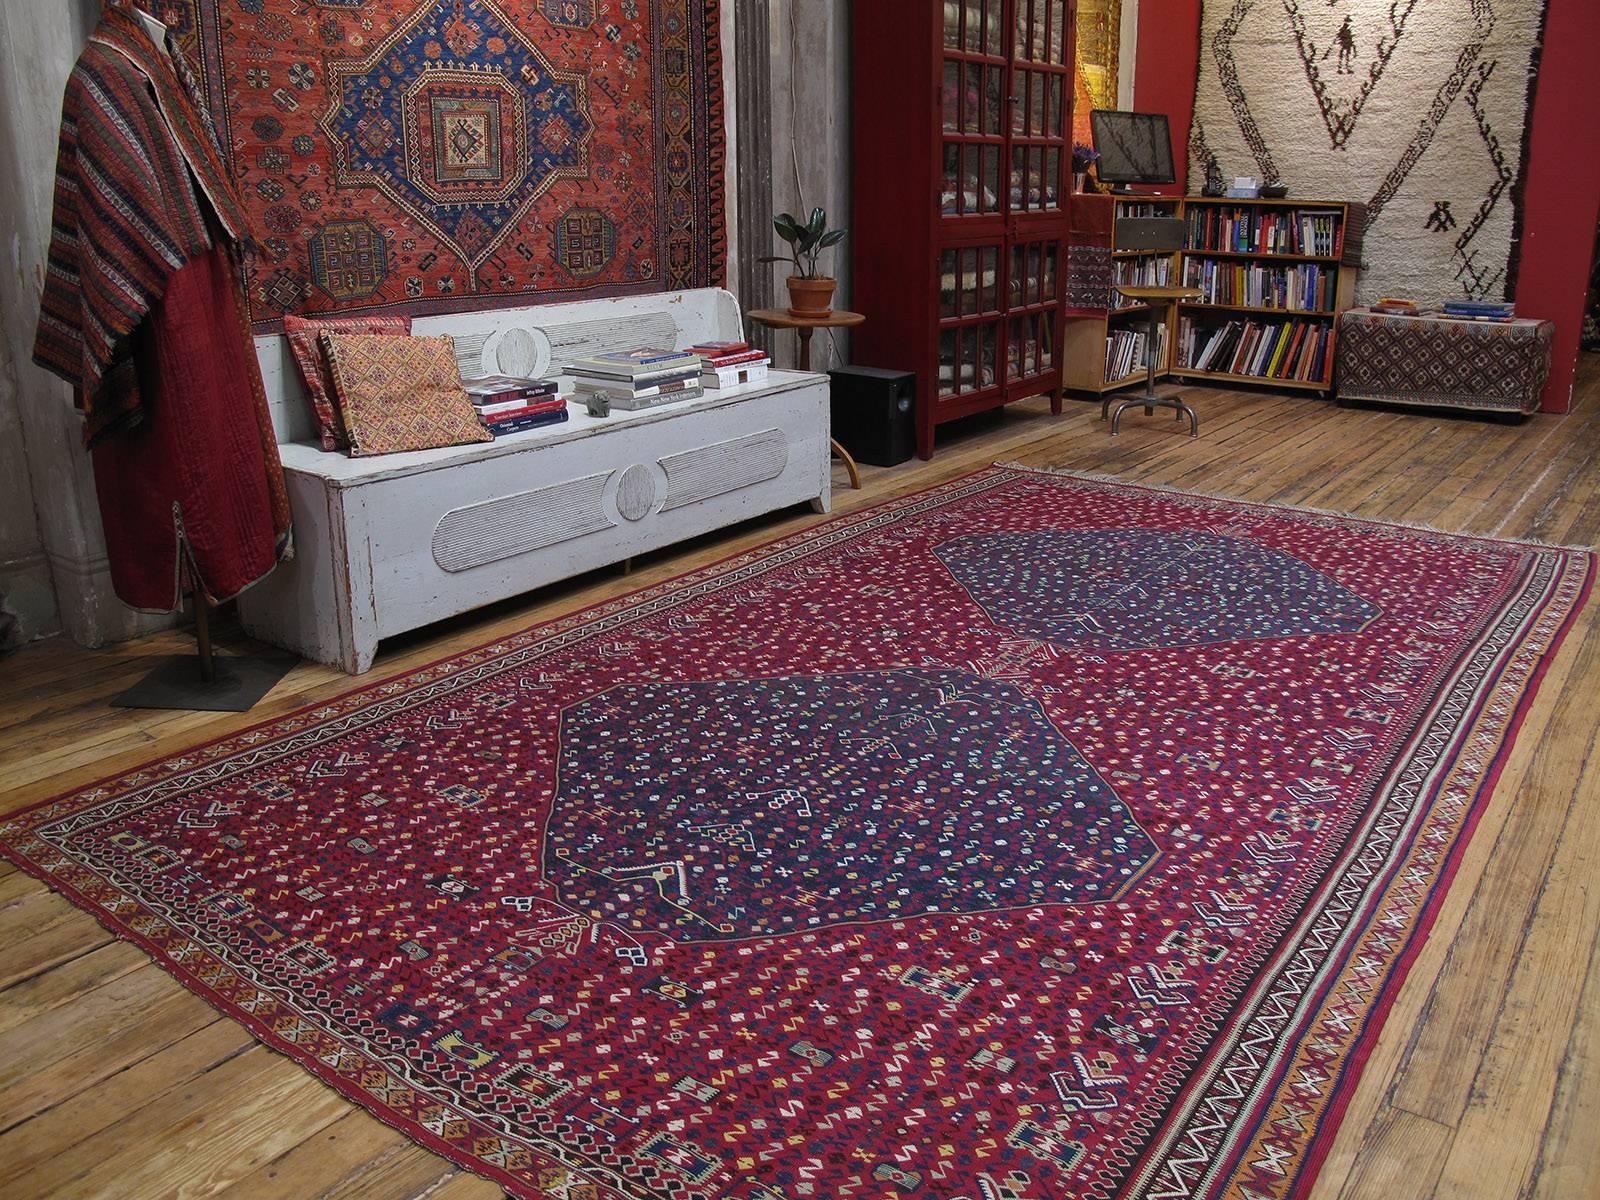 Antique Erzurum Kilim rug. A highly unusual antique Kilim rug from a region in Eastern Turkey that is famous for its finely woven Kilims. This is a rather large piece and the design is quite unique in our experience, as most Erzurum Kilims are in